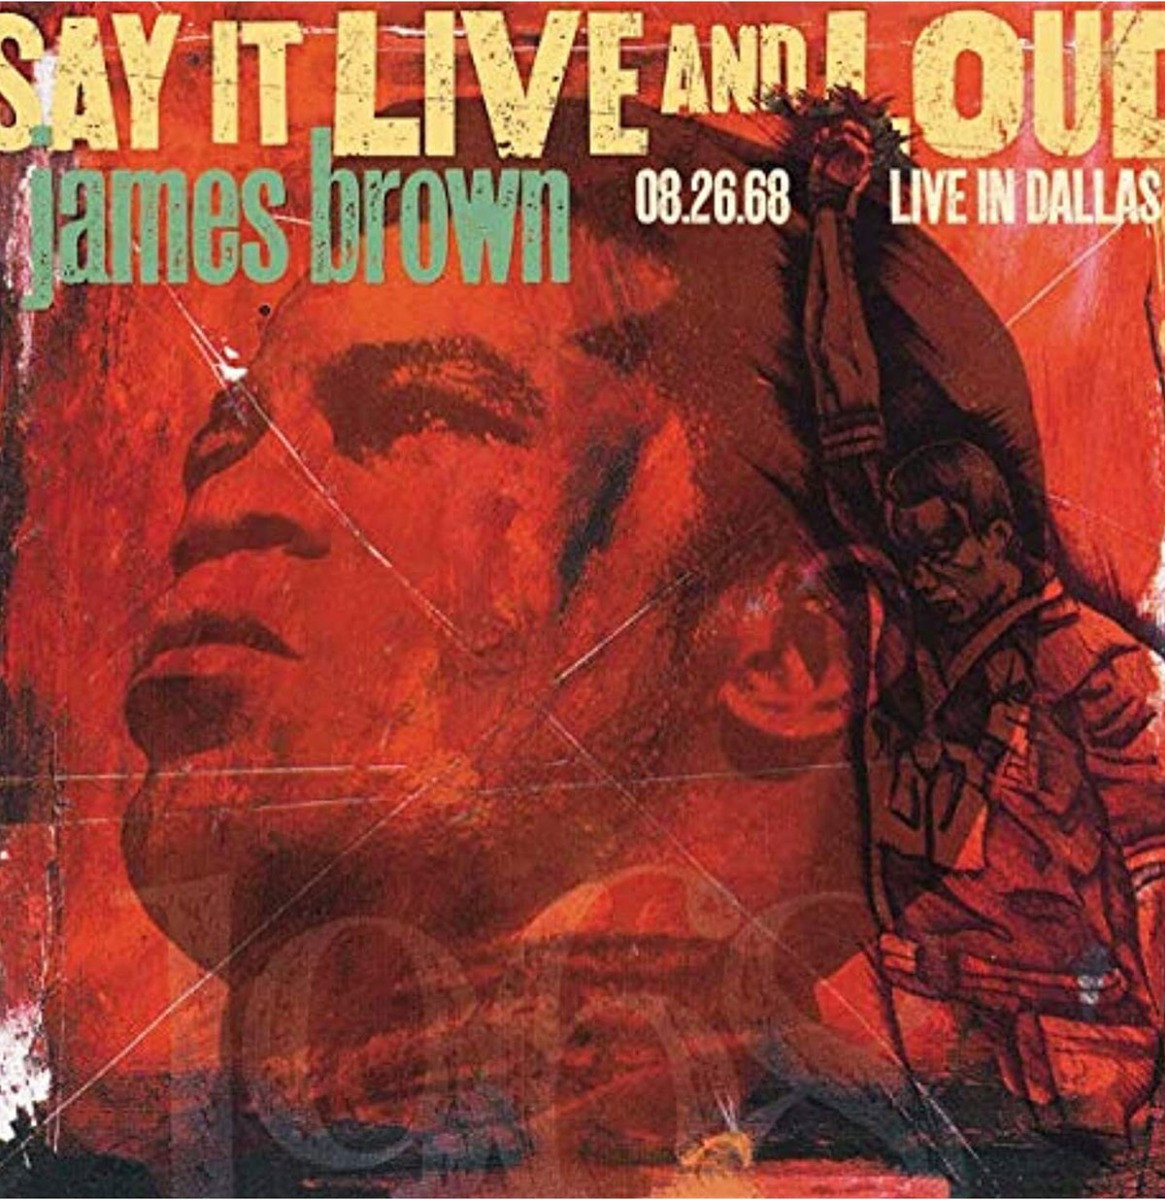 James Brown - Say It Live And Loud (08.26.68 Live In Dallas) 2LP